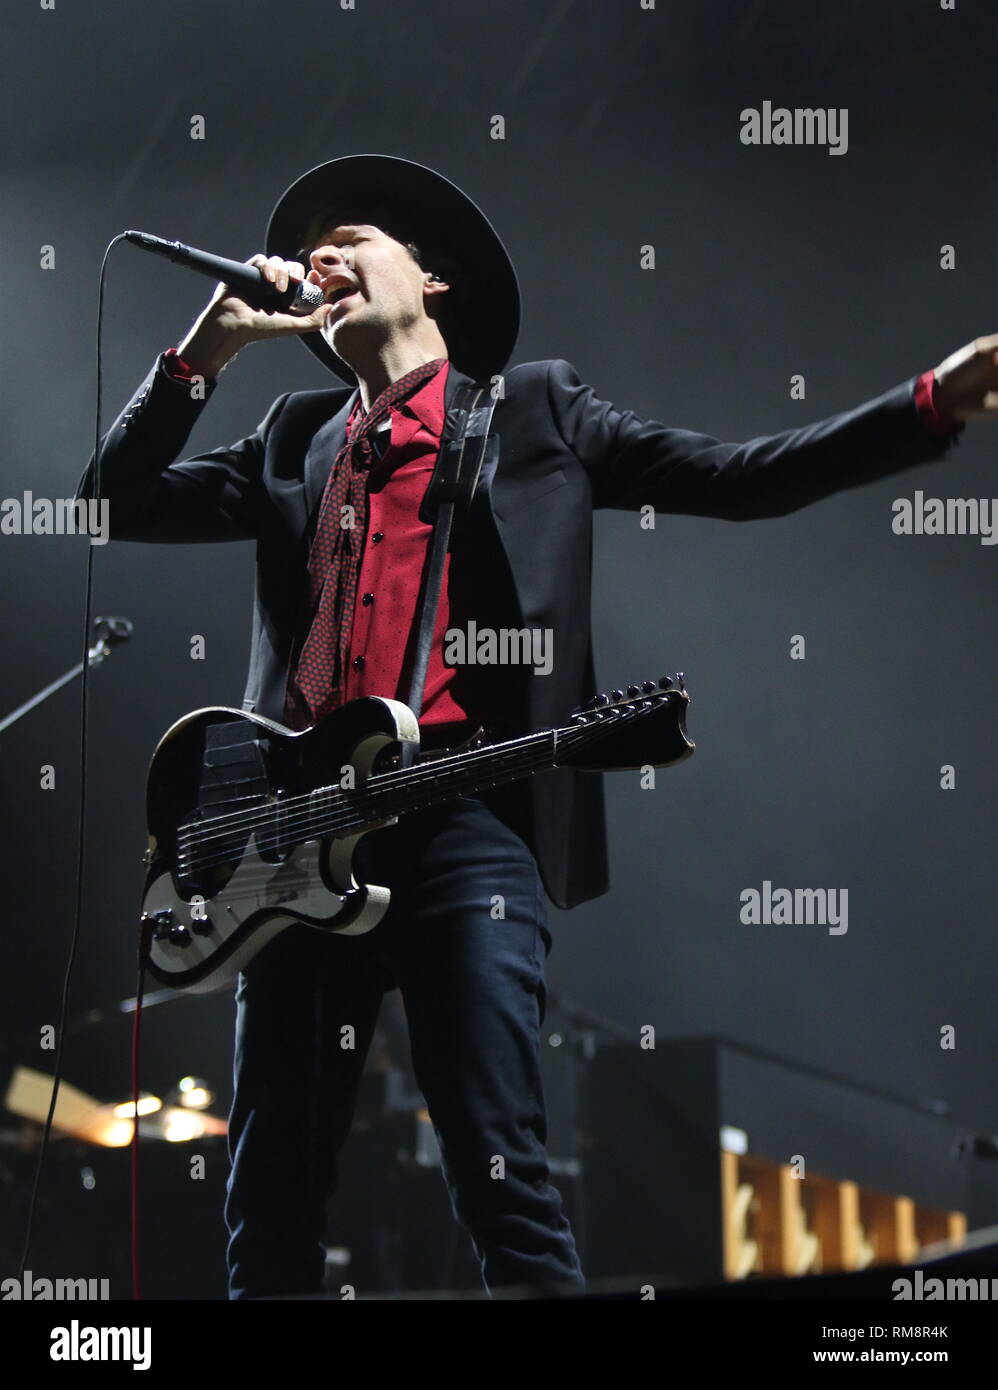 Beck is shown performing on stage during a 'live' concert appearance. Stock Photo